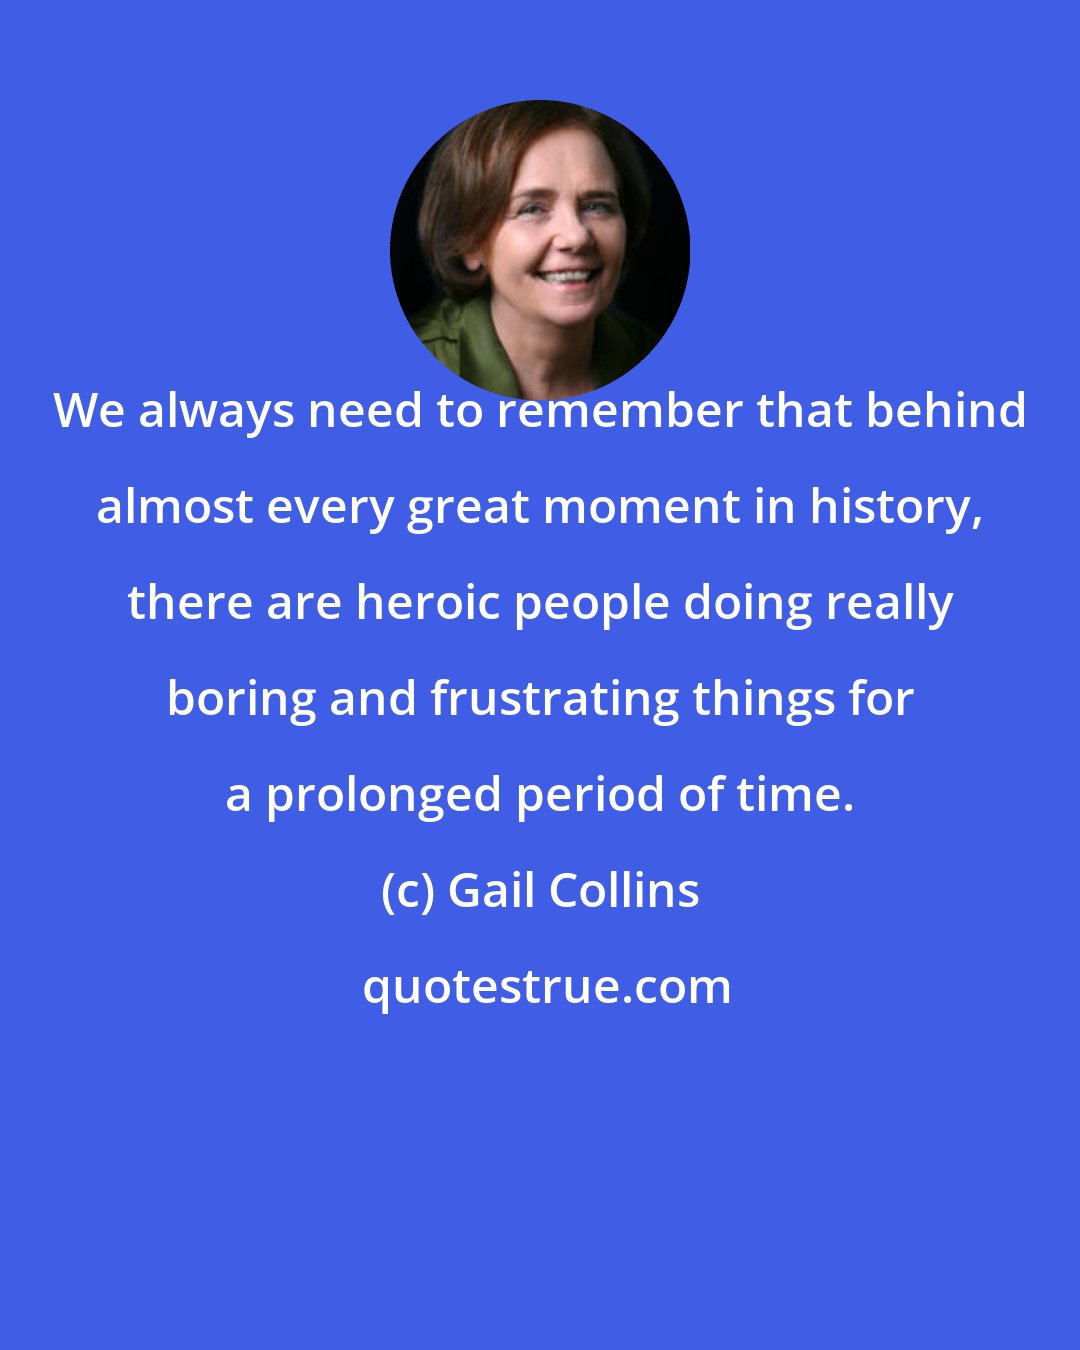 Gail Collins: We always need to remember that behind almost every great moment in history, there are heroic people doing really boring and frustrating things for a prolonged period of time.